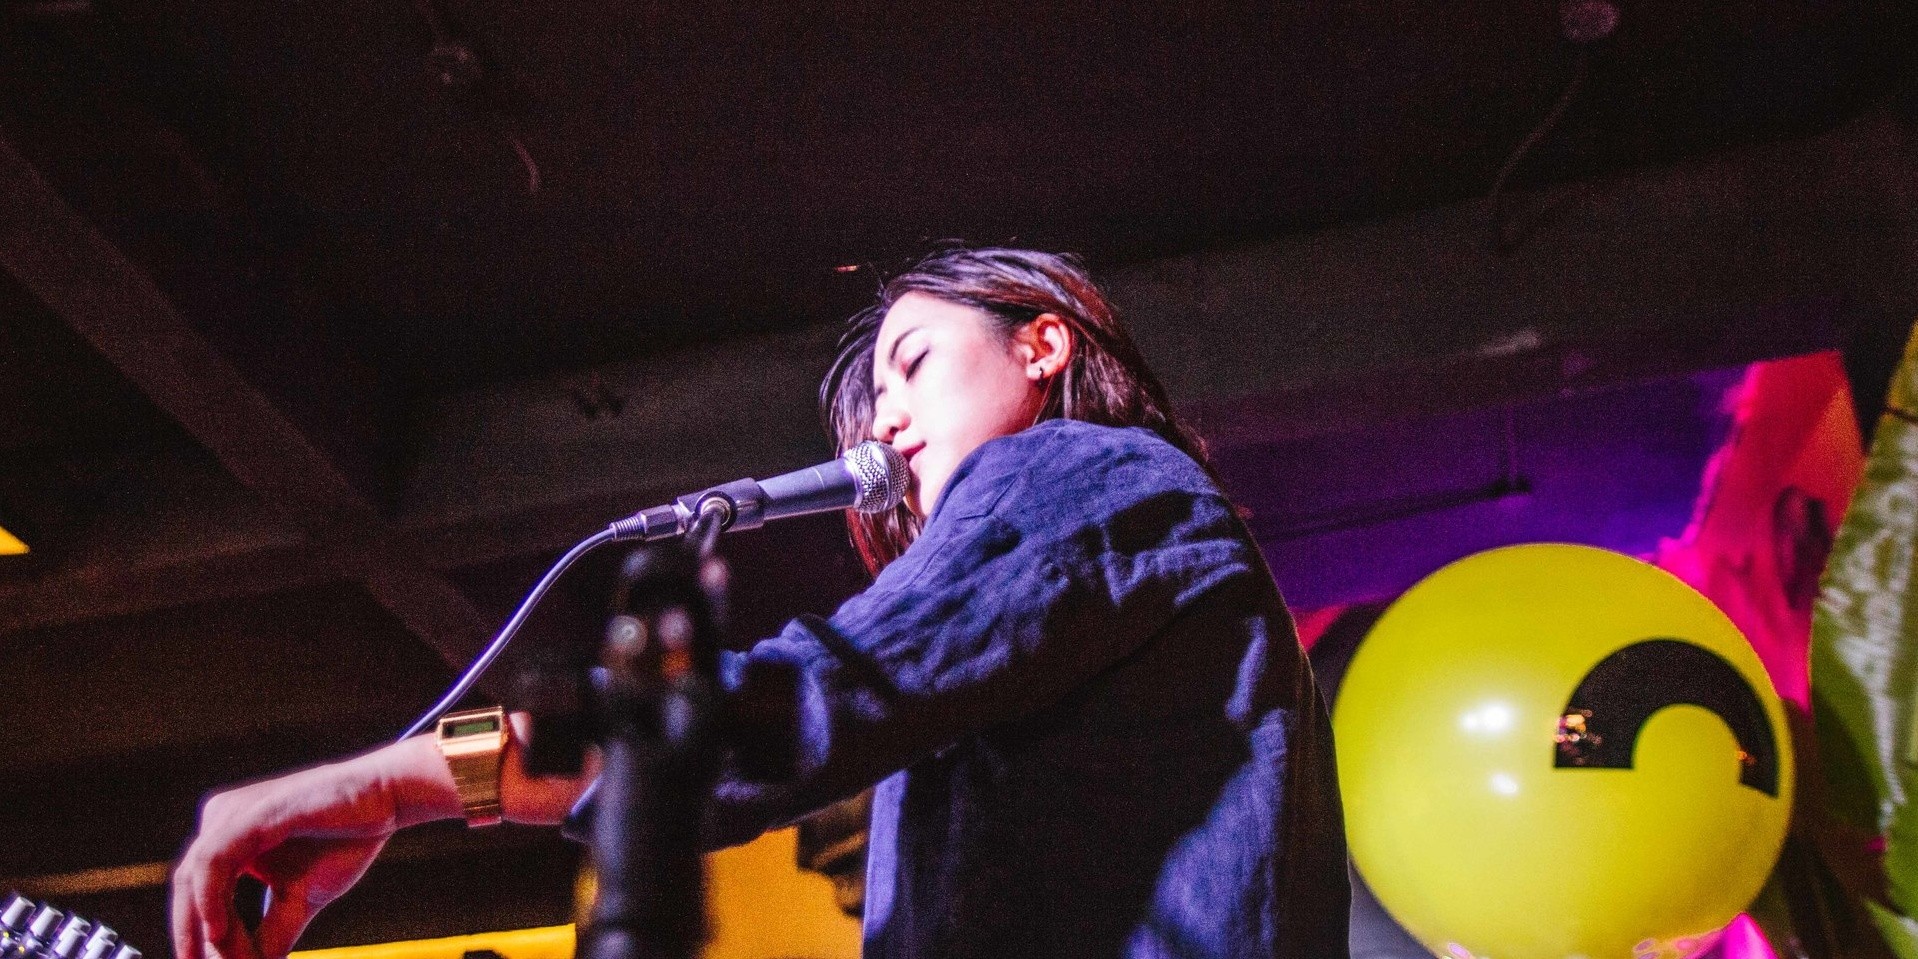 "The heart of the teenager is still there": BP Valenzuela on half-lit's latest single 'fri the 13th' and upcoming paradigm shift EP – listen